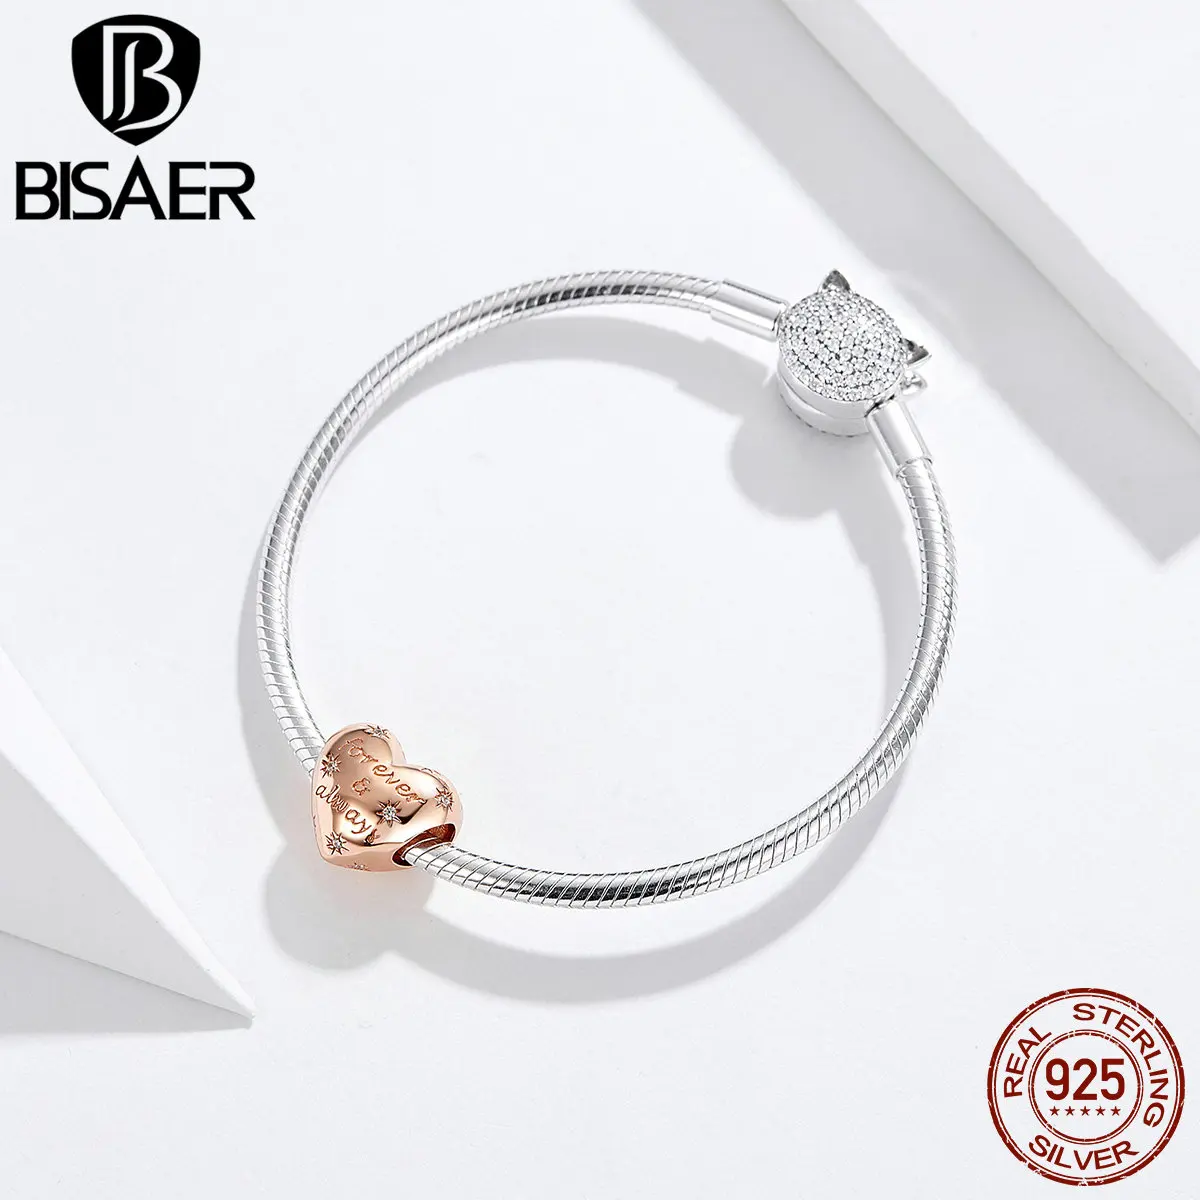 BISAER Genuine 925 Sterling Silver Heart Shape Beads Charms Fit For Women Bracelets Rose Gold Color Jewelry Making HSC1223